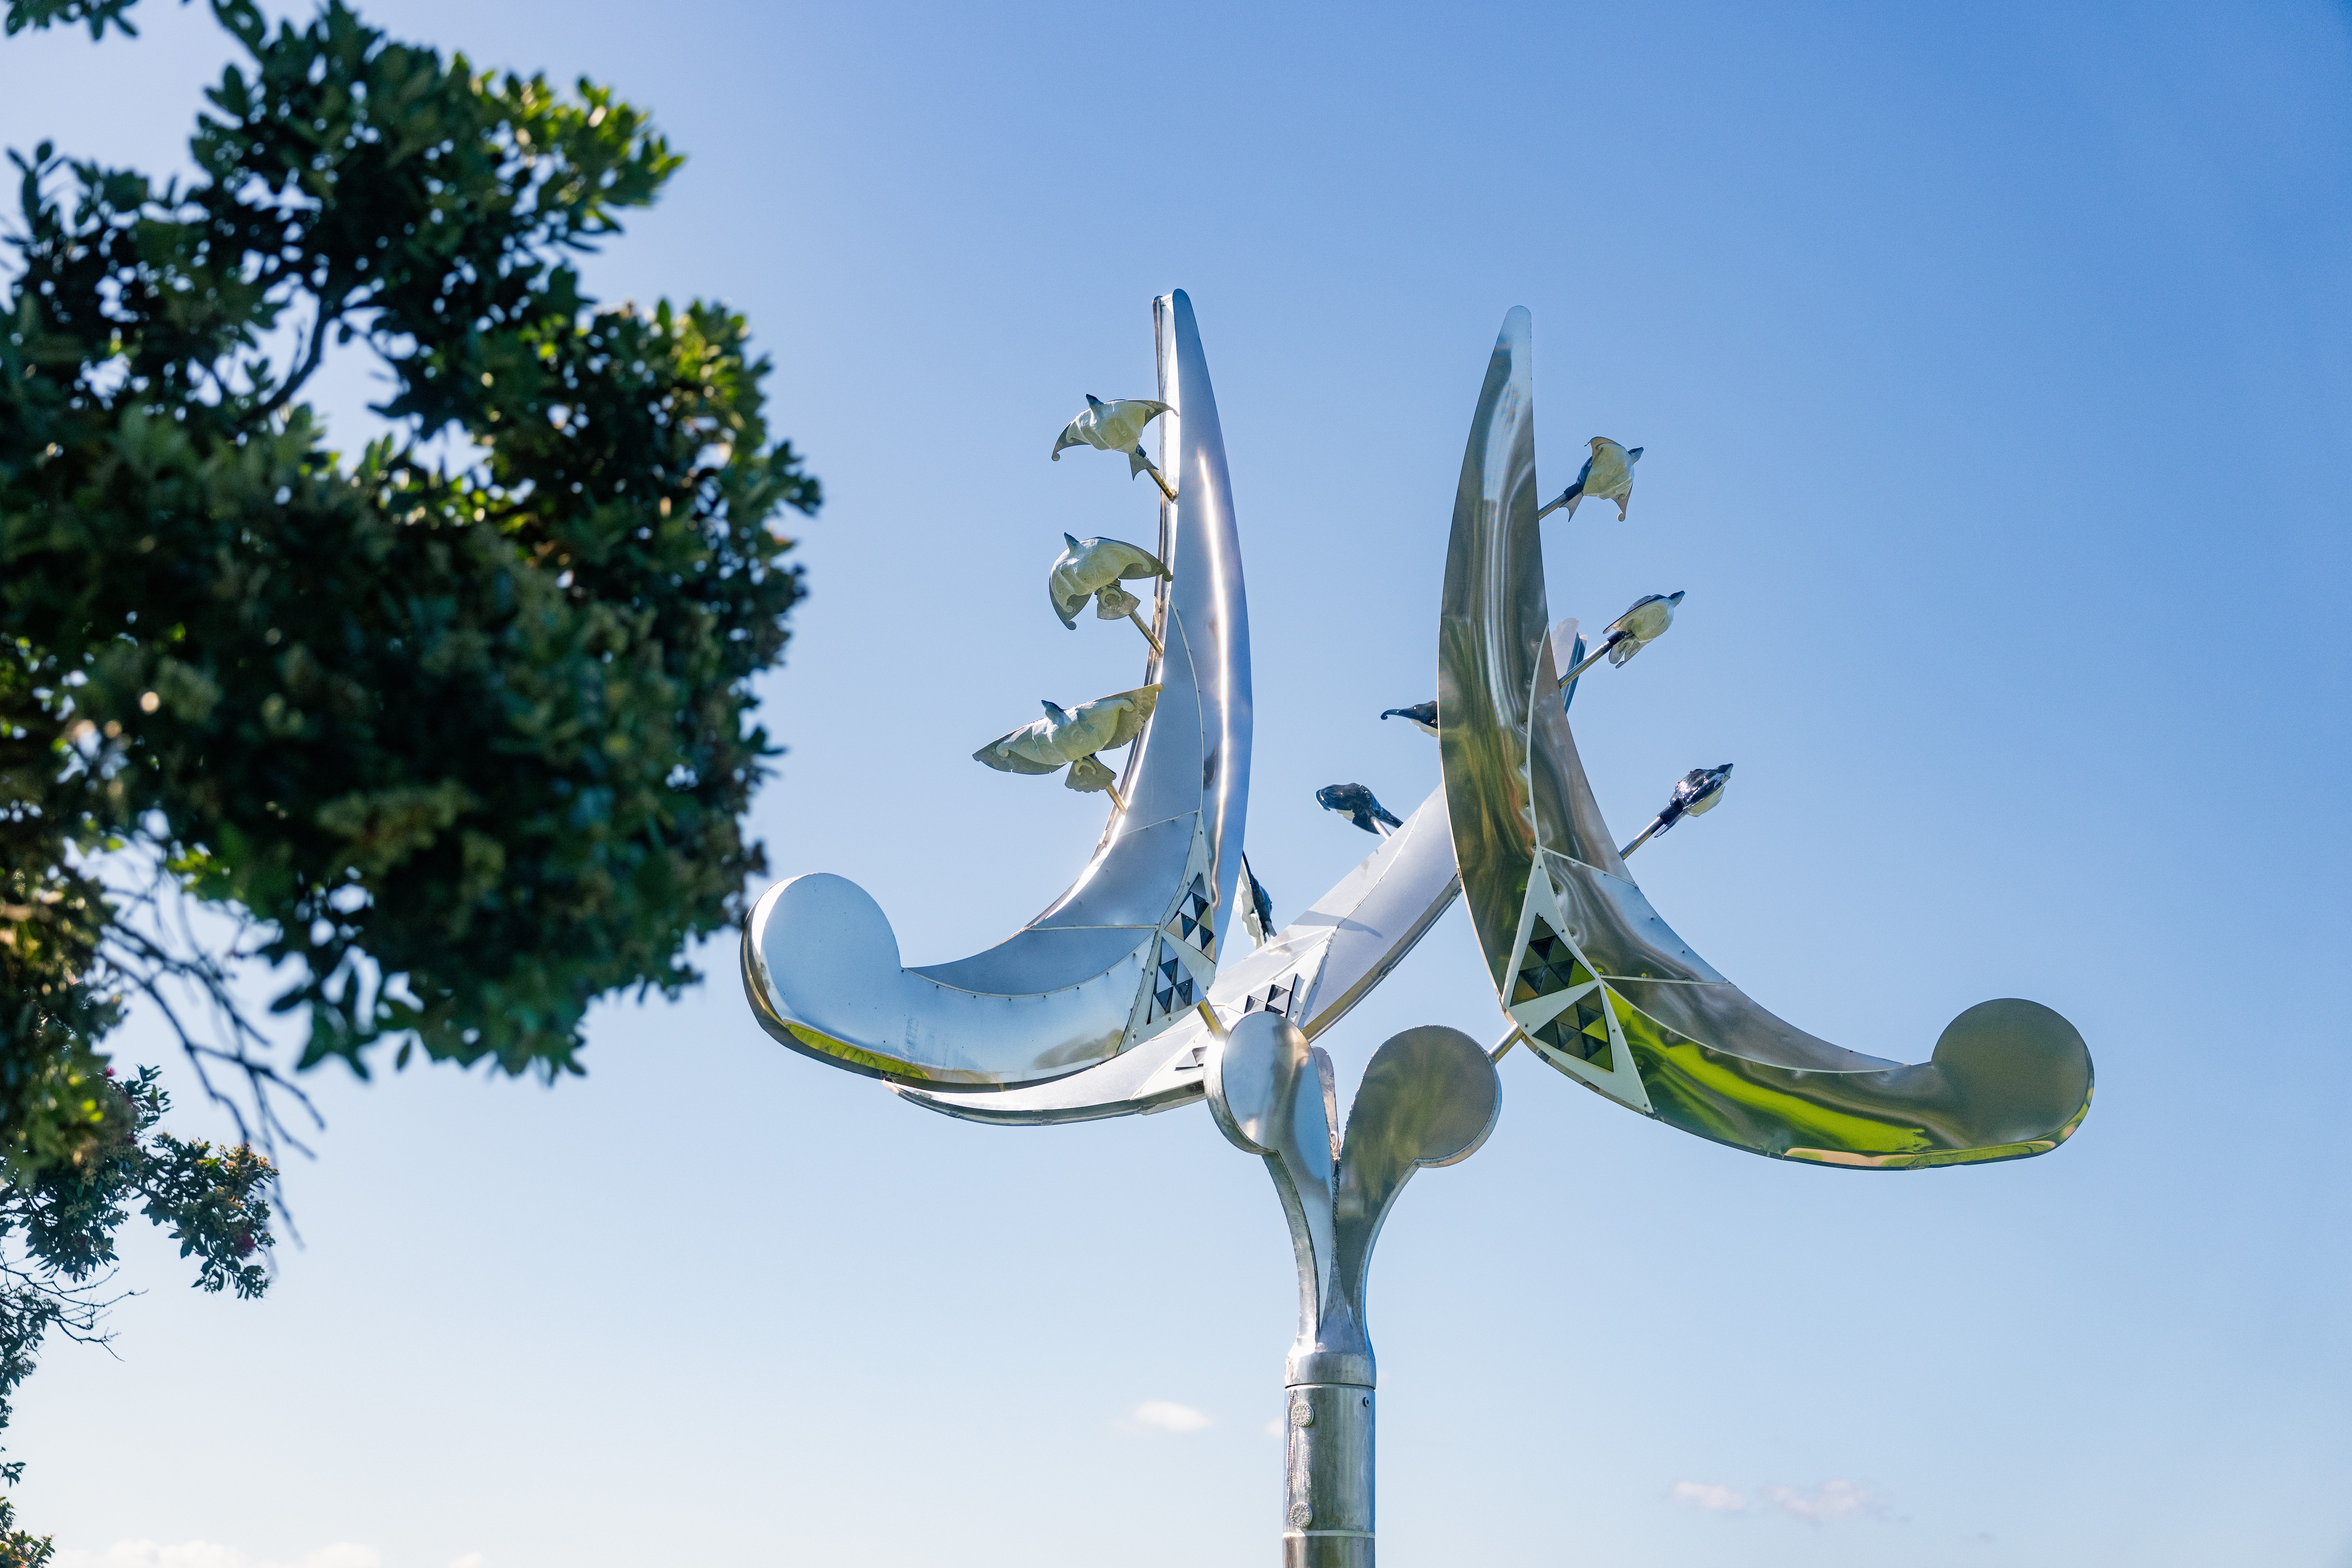 The inspiration behind Dion Hitchens’ Ngā Manu was a whakatauki (proverb) that celebrates diversity within communities as a strength. Check it out at Sanctuary Point, Bramley Drive Reserve, Pakuranga.